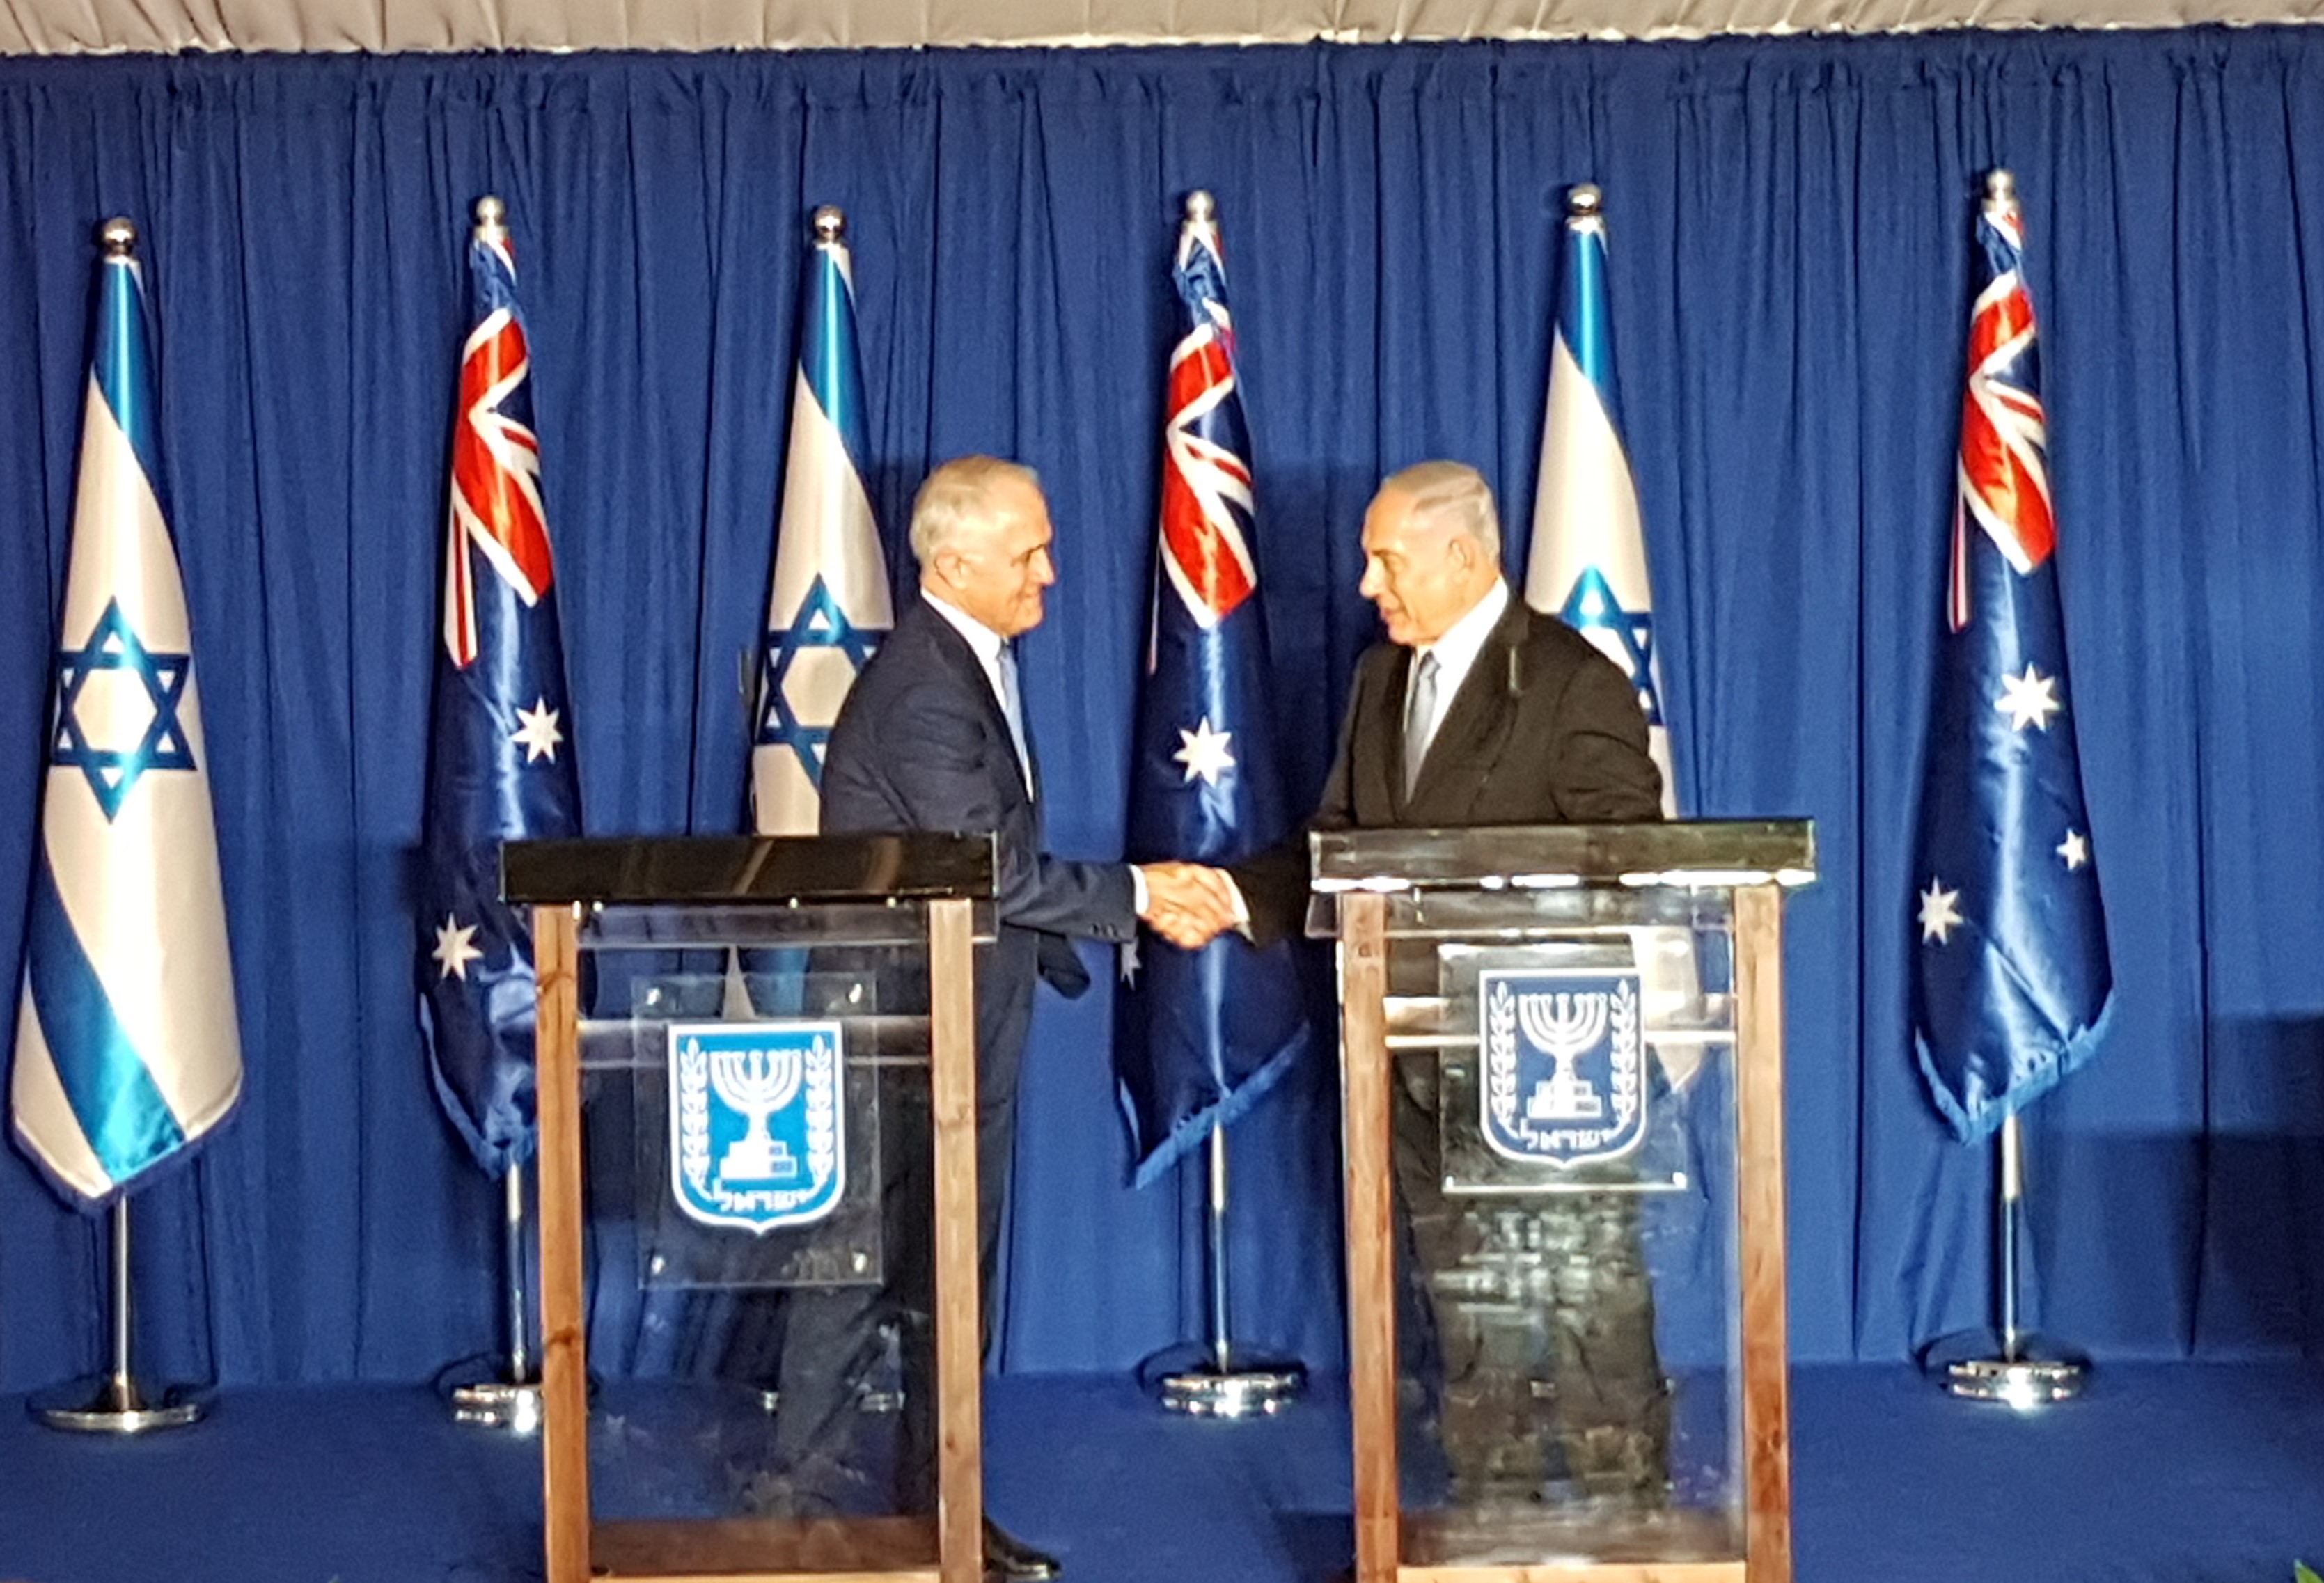 PM Netanyahu and his Wife Sara Welcome Australian PM Malcolm Turnbull and his Wife Lucy in an Official Ceremony 